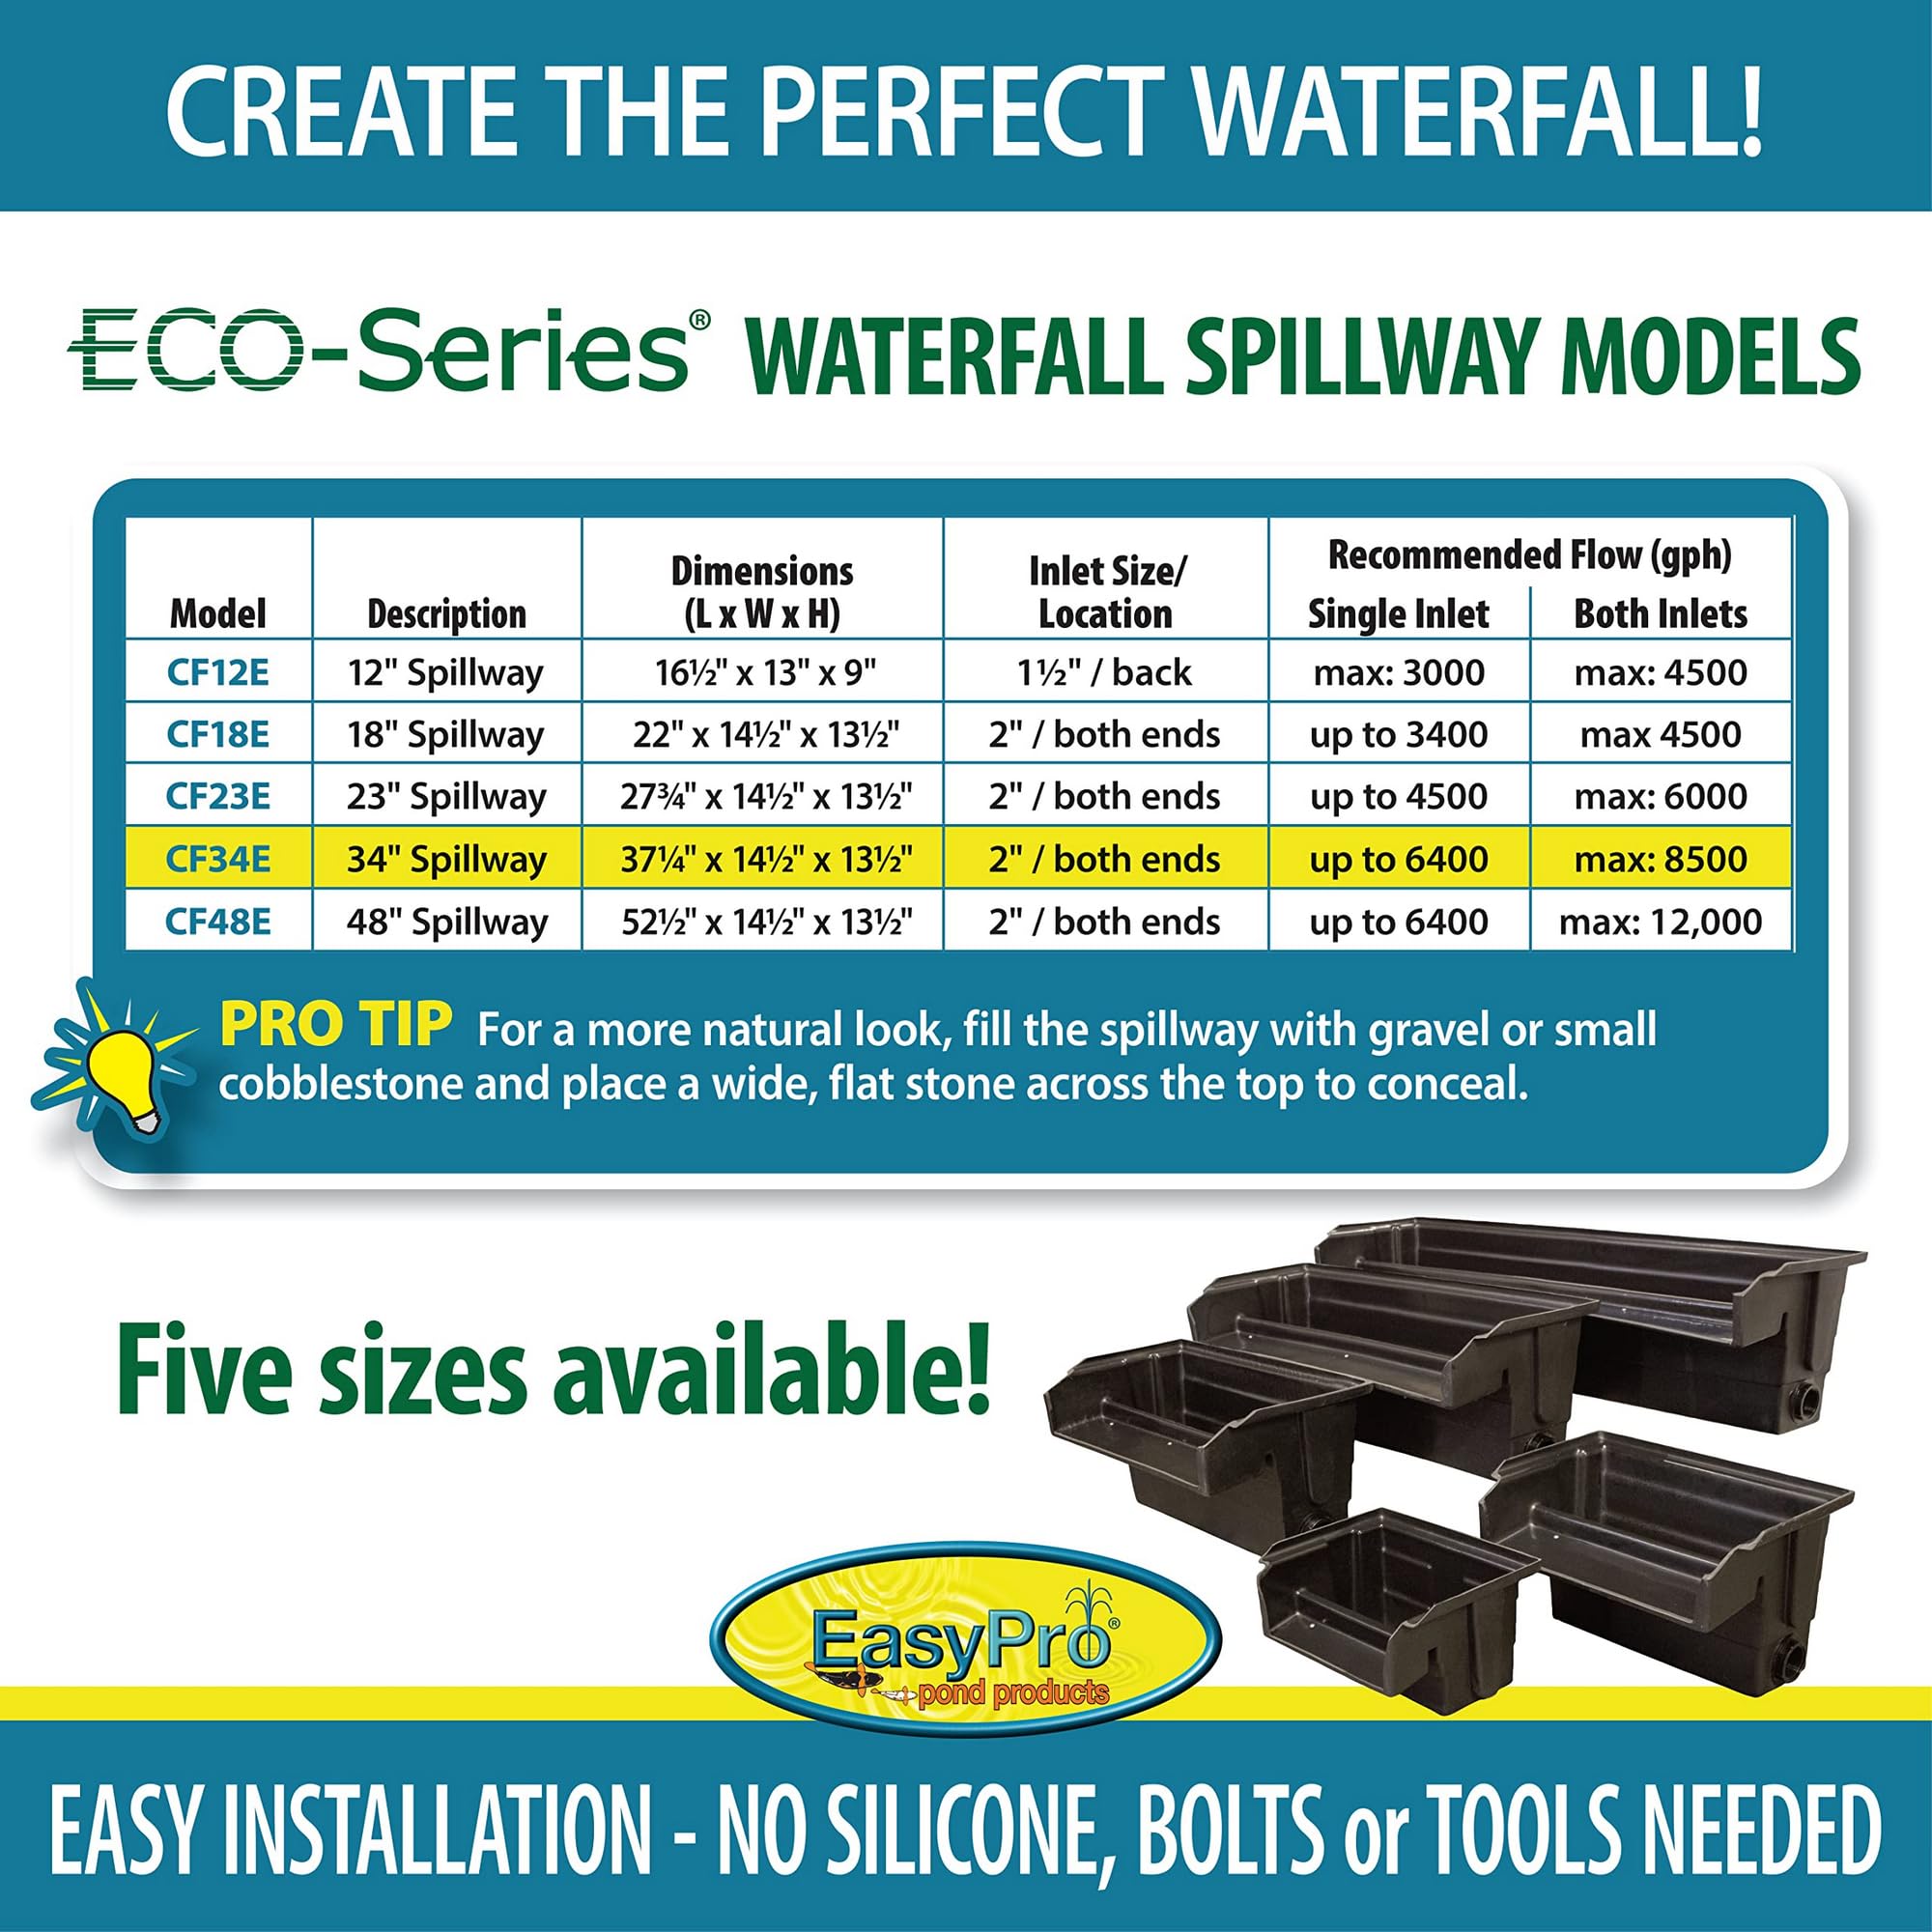 EasyPro Pond Products CF34E Eco-Series 34” Waterfall Spillway is Ideal for Just-A-Falls Water Features. Connect Liner Without Tools. 2-2” Installed Spinweld Inlets. Up to 6400 to 8500 GPH Flow